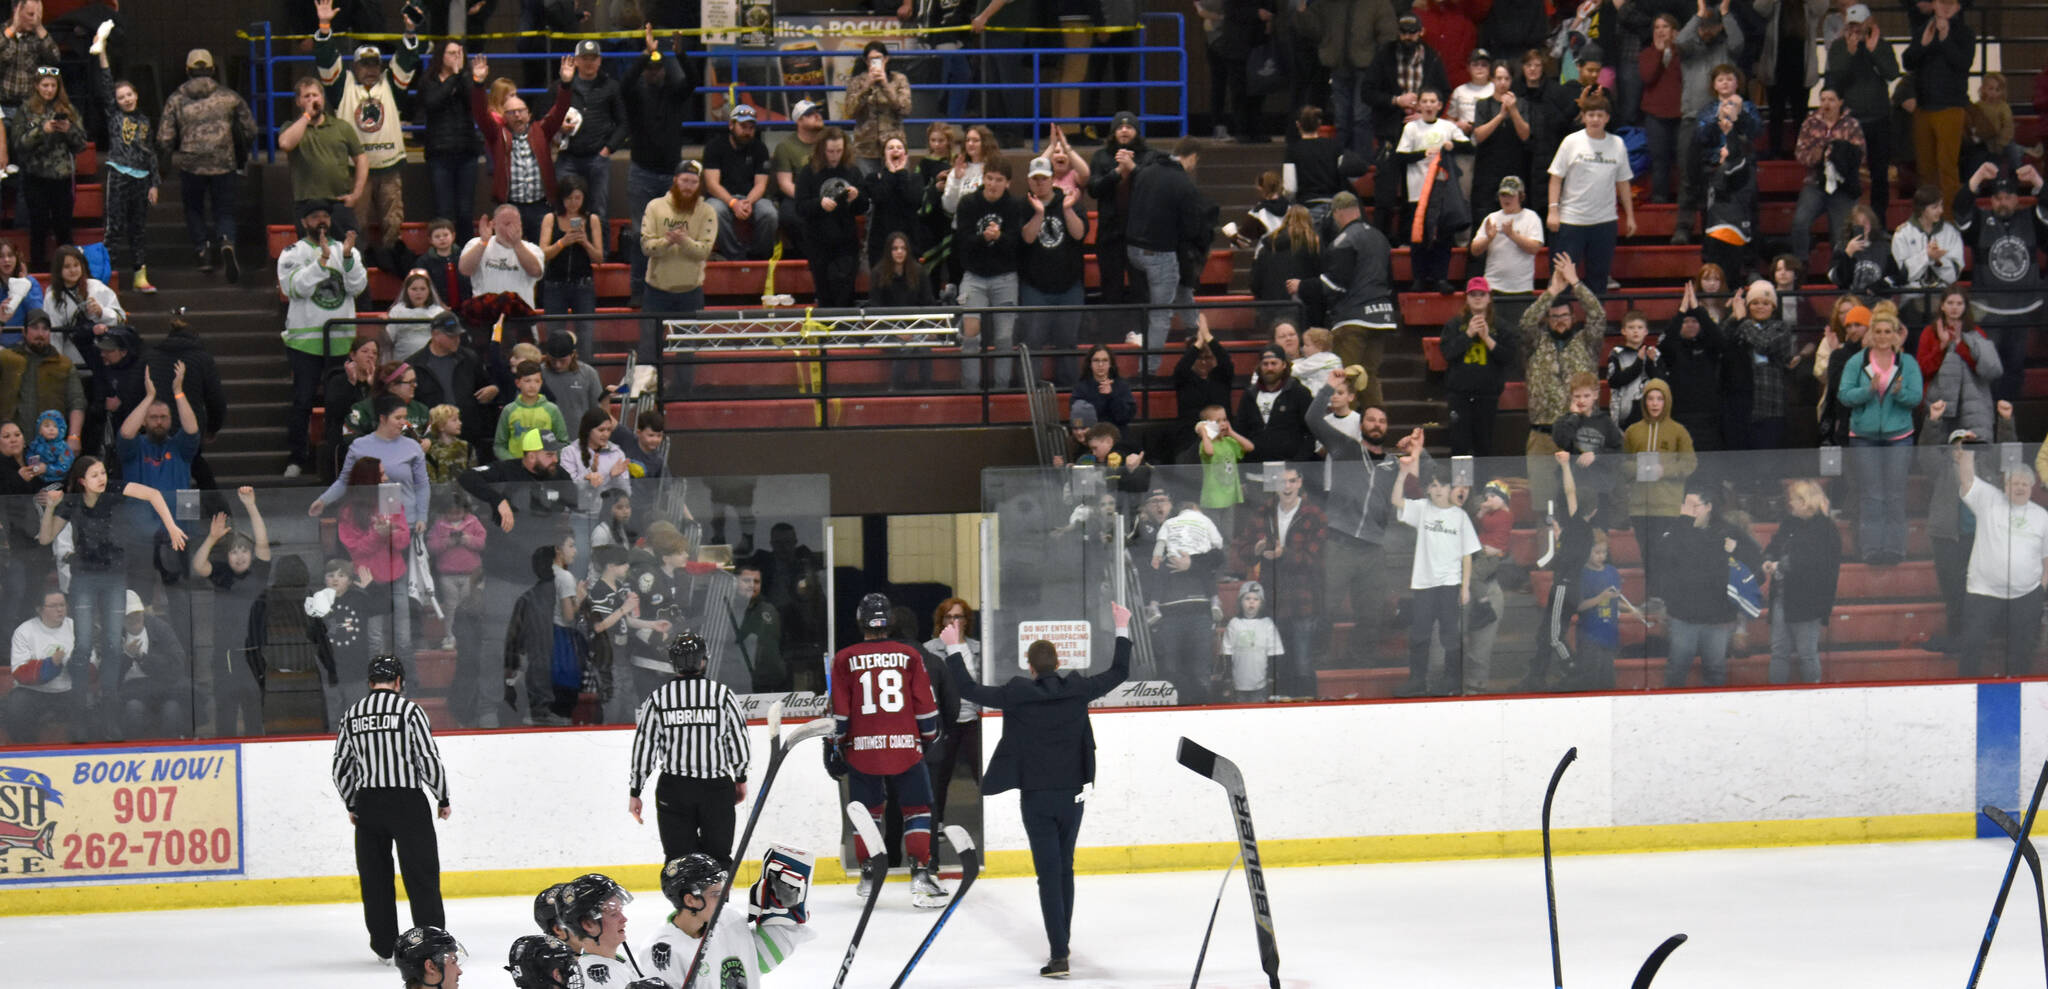 Kenai River head coach Taylor Shaw thanks the crowd after the Brown Bears defeated the Fairbanks Ice Dogs in overtime Saturday, Feb. 18, 2023, at the Soldotna Regional Sports Complex in Soldotna, Alaska. (Photo by Jeff Helminiak/Peninsula Clarion)